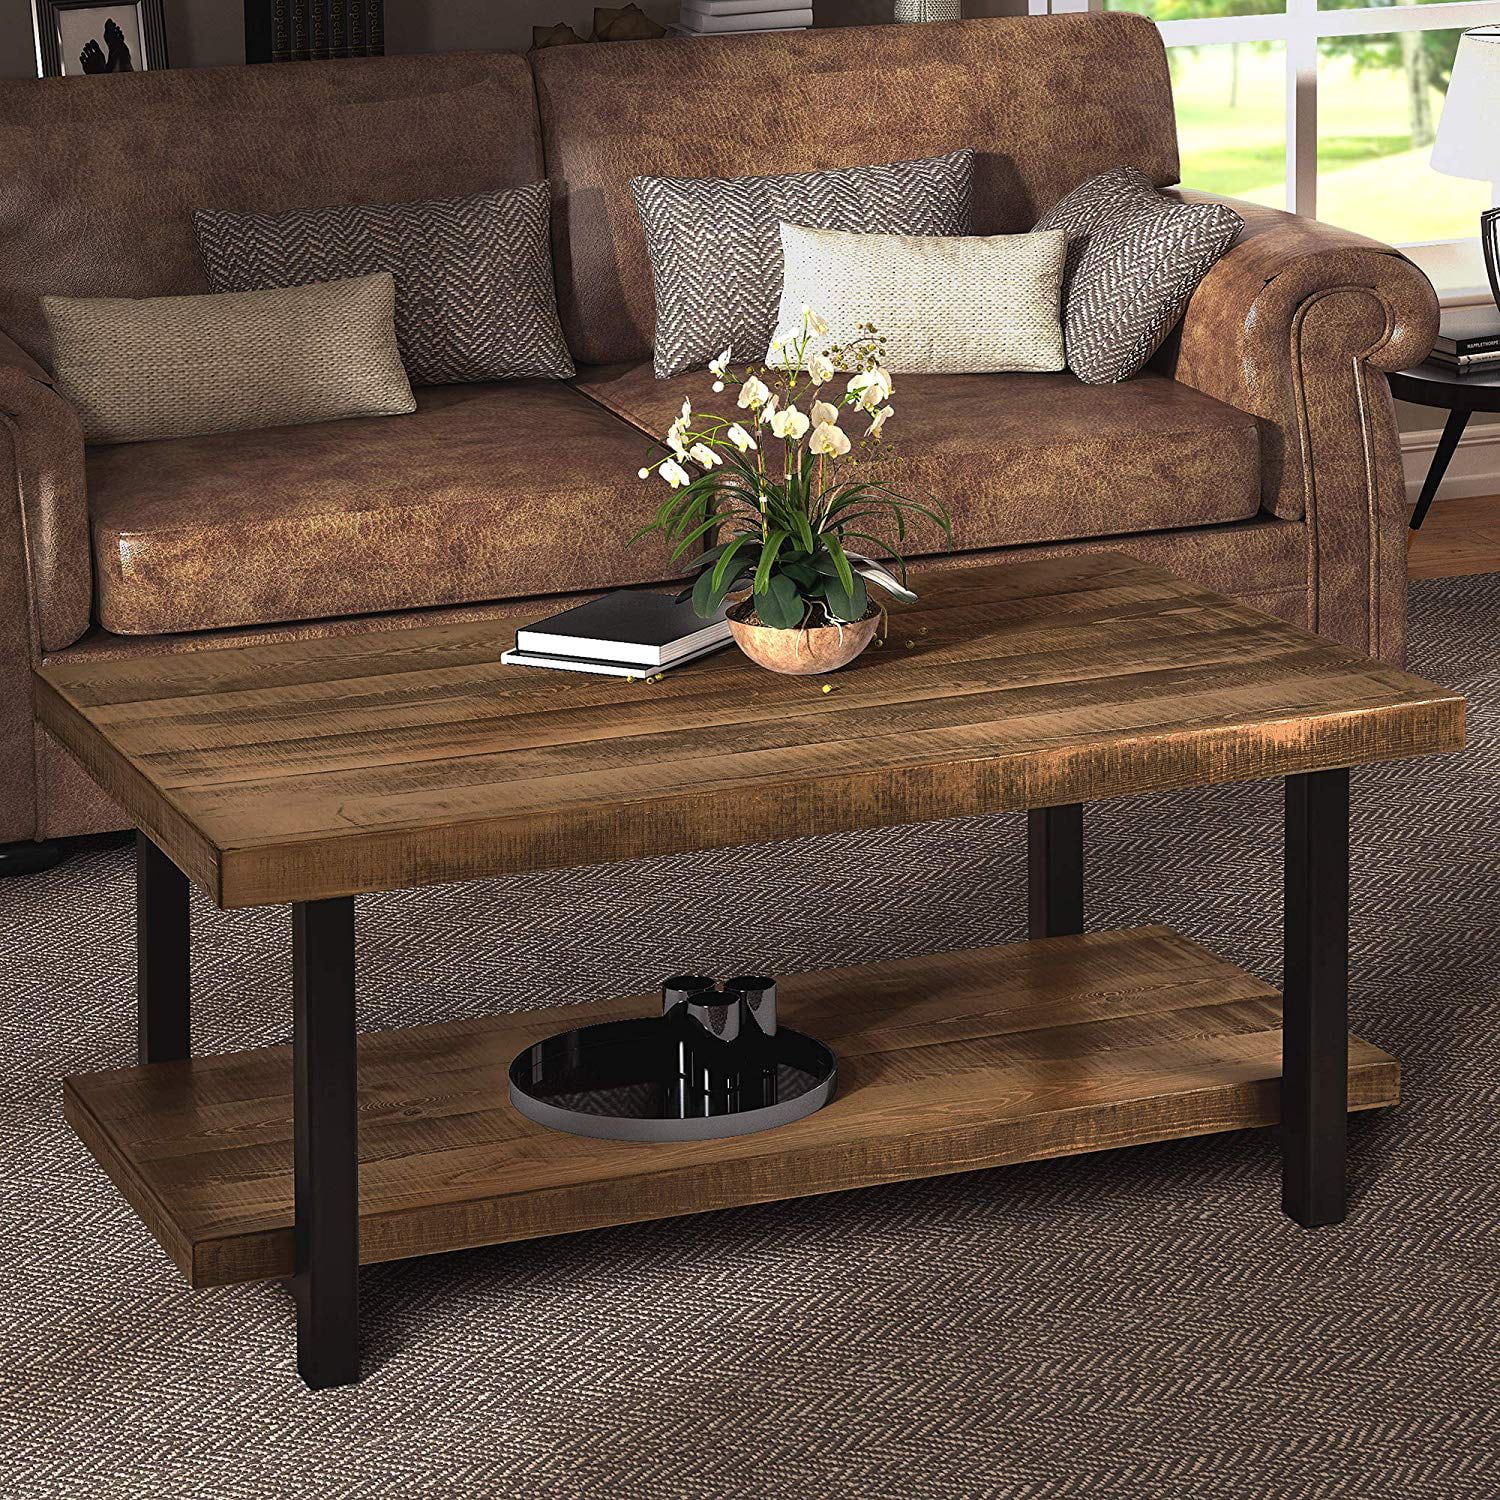 Harper&bright Designs Industrial Rectangular Pine Wood Coffee Table Inside Brown Rustic Coffee Tables (View 8 of 20)